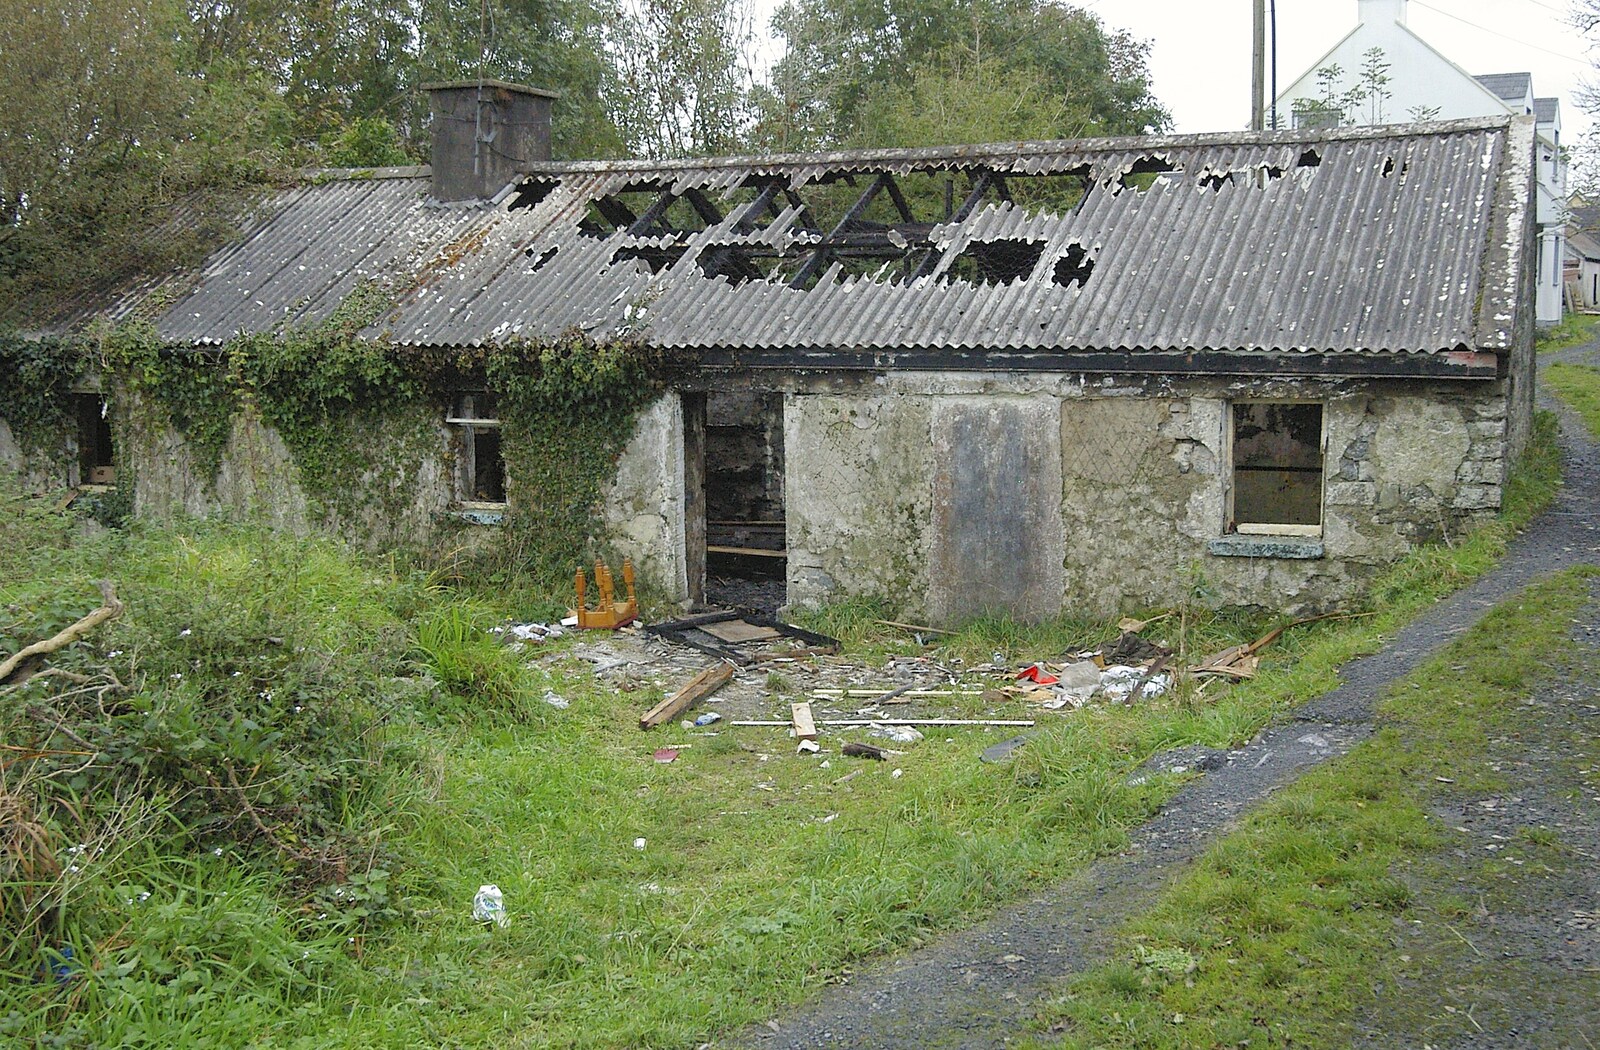 A derelict building from Corofin, Ennistymon and The Burran, County Clare, Western Ireland - 27th October 2006